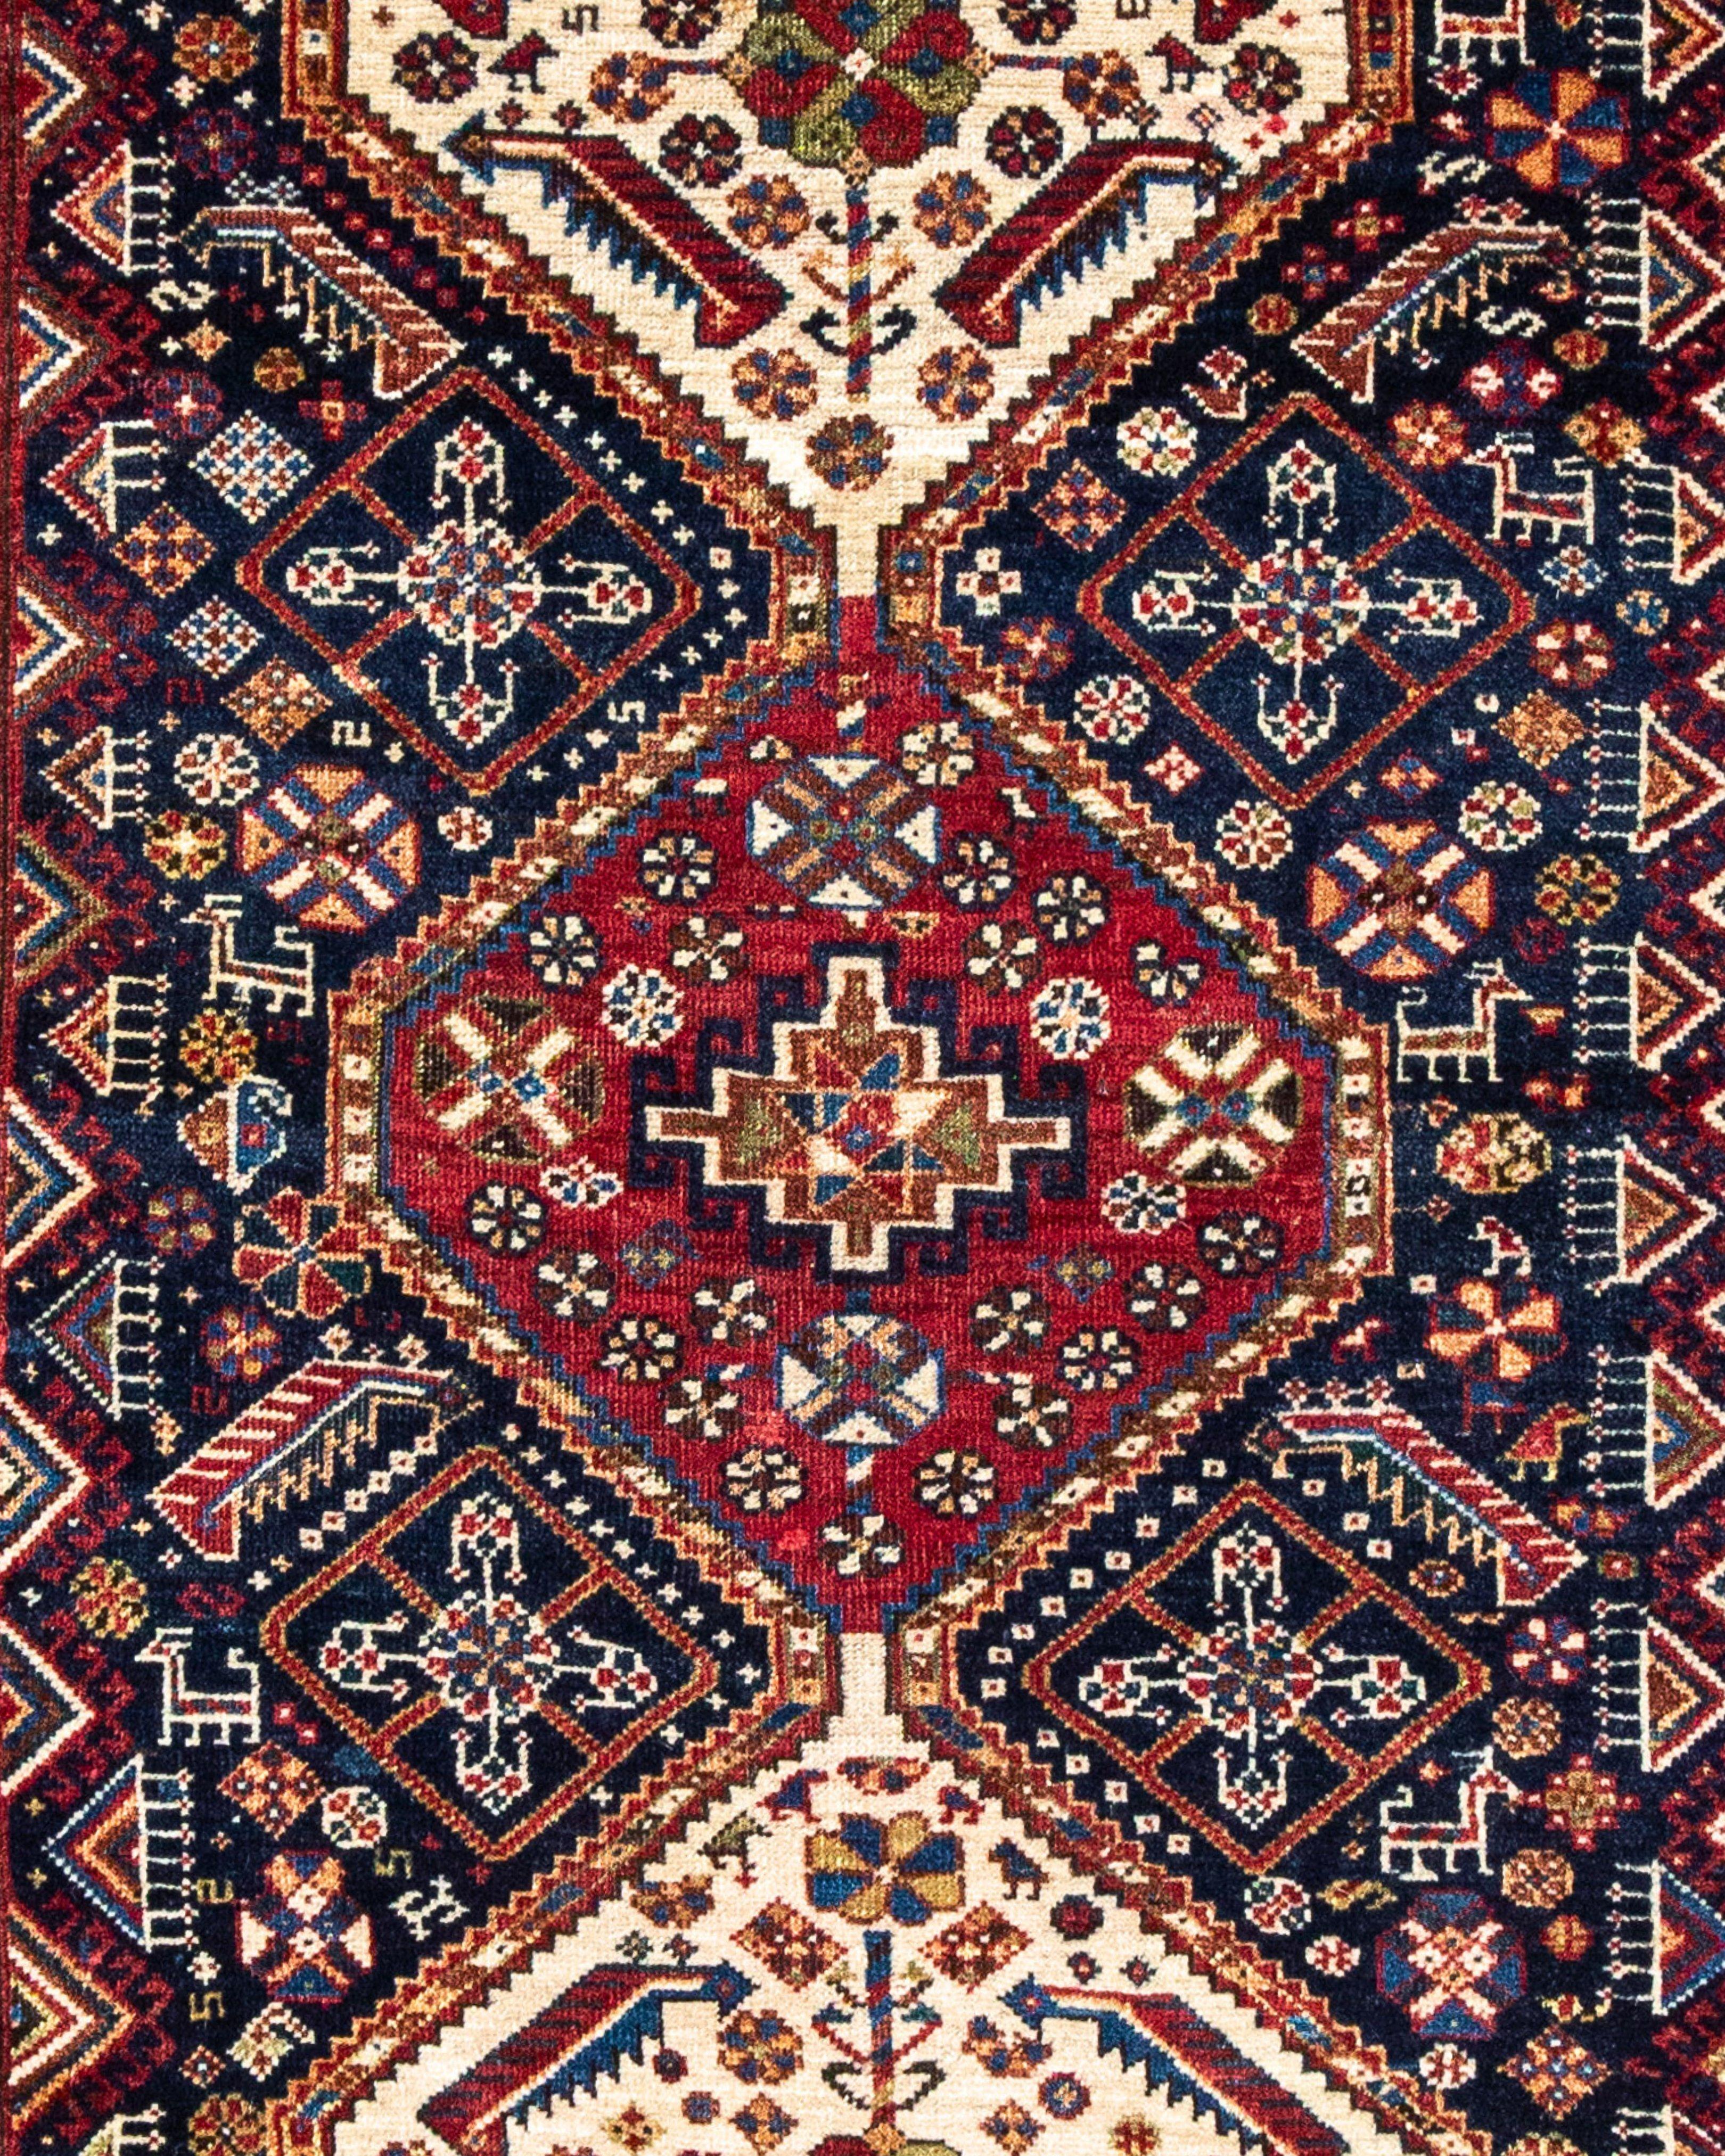 Antique Southwest Persian Qashqai Rug, c. 1900

Very good condition. Only a slight thinning of the pile in the center medallion. Gorgeous glossy wool. Complete original ends and selvedges.

Additional Information:
Dimensions: 4'0